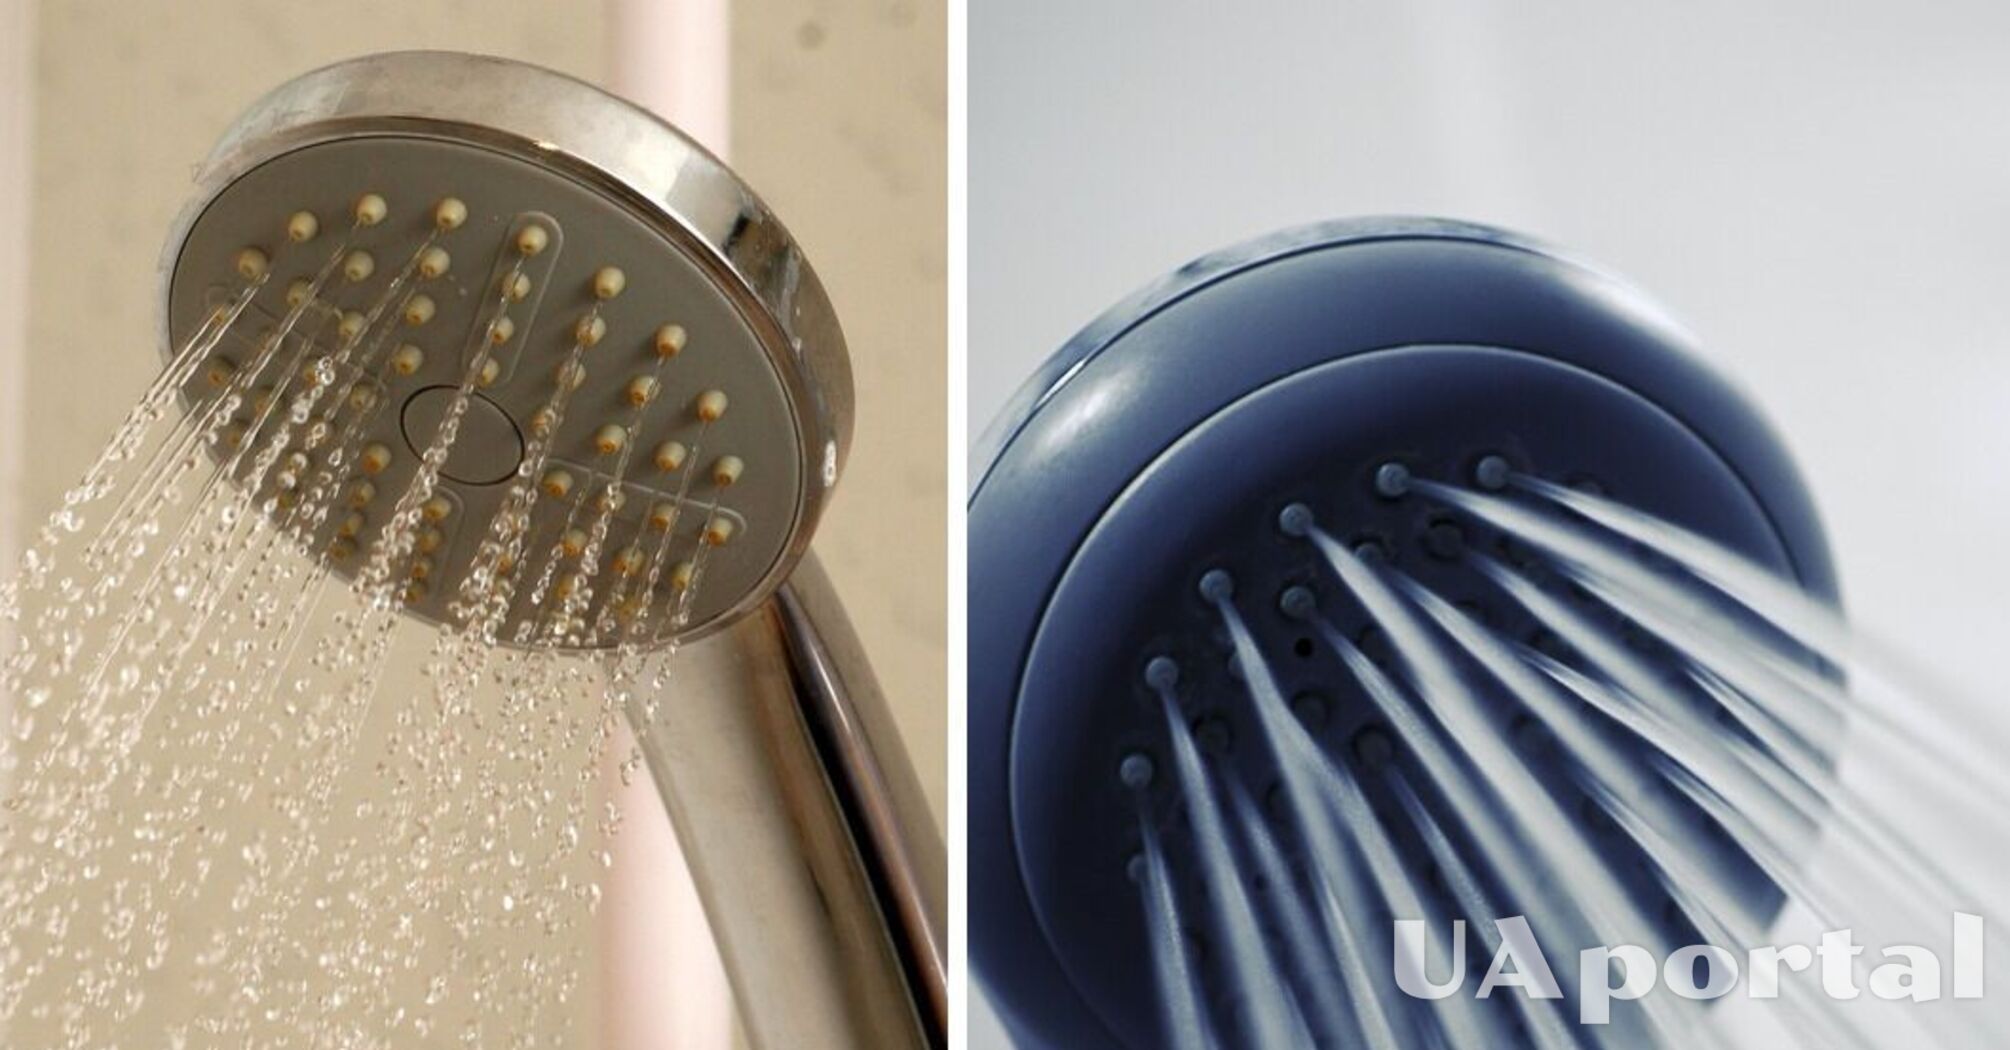 Experts explain how to significantly increase the water pressure in the shower